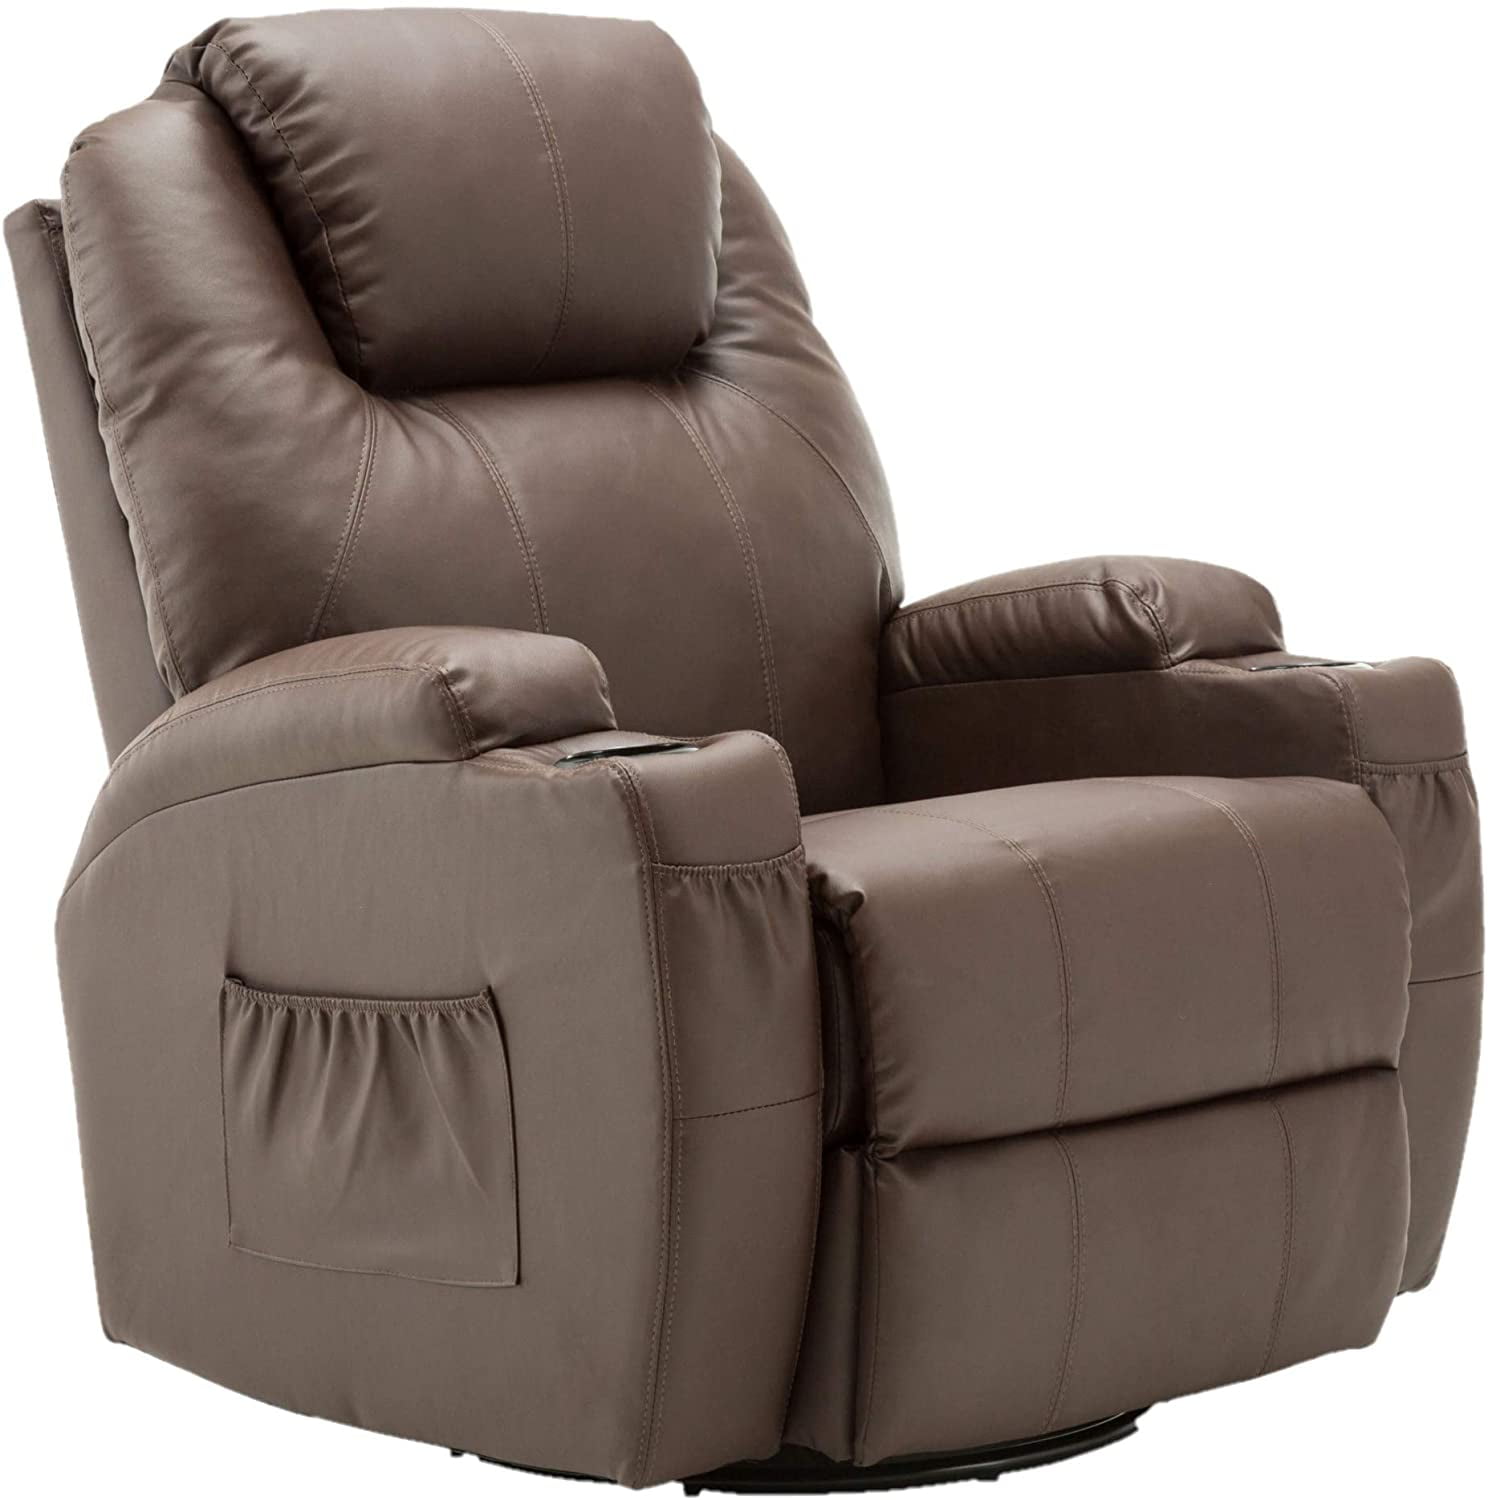 Mcombo Faux Leather Recliner Brown, Leather Recliner Swivel